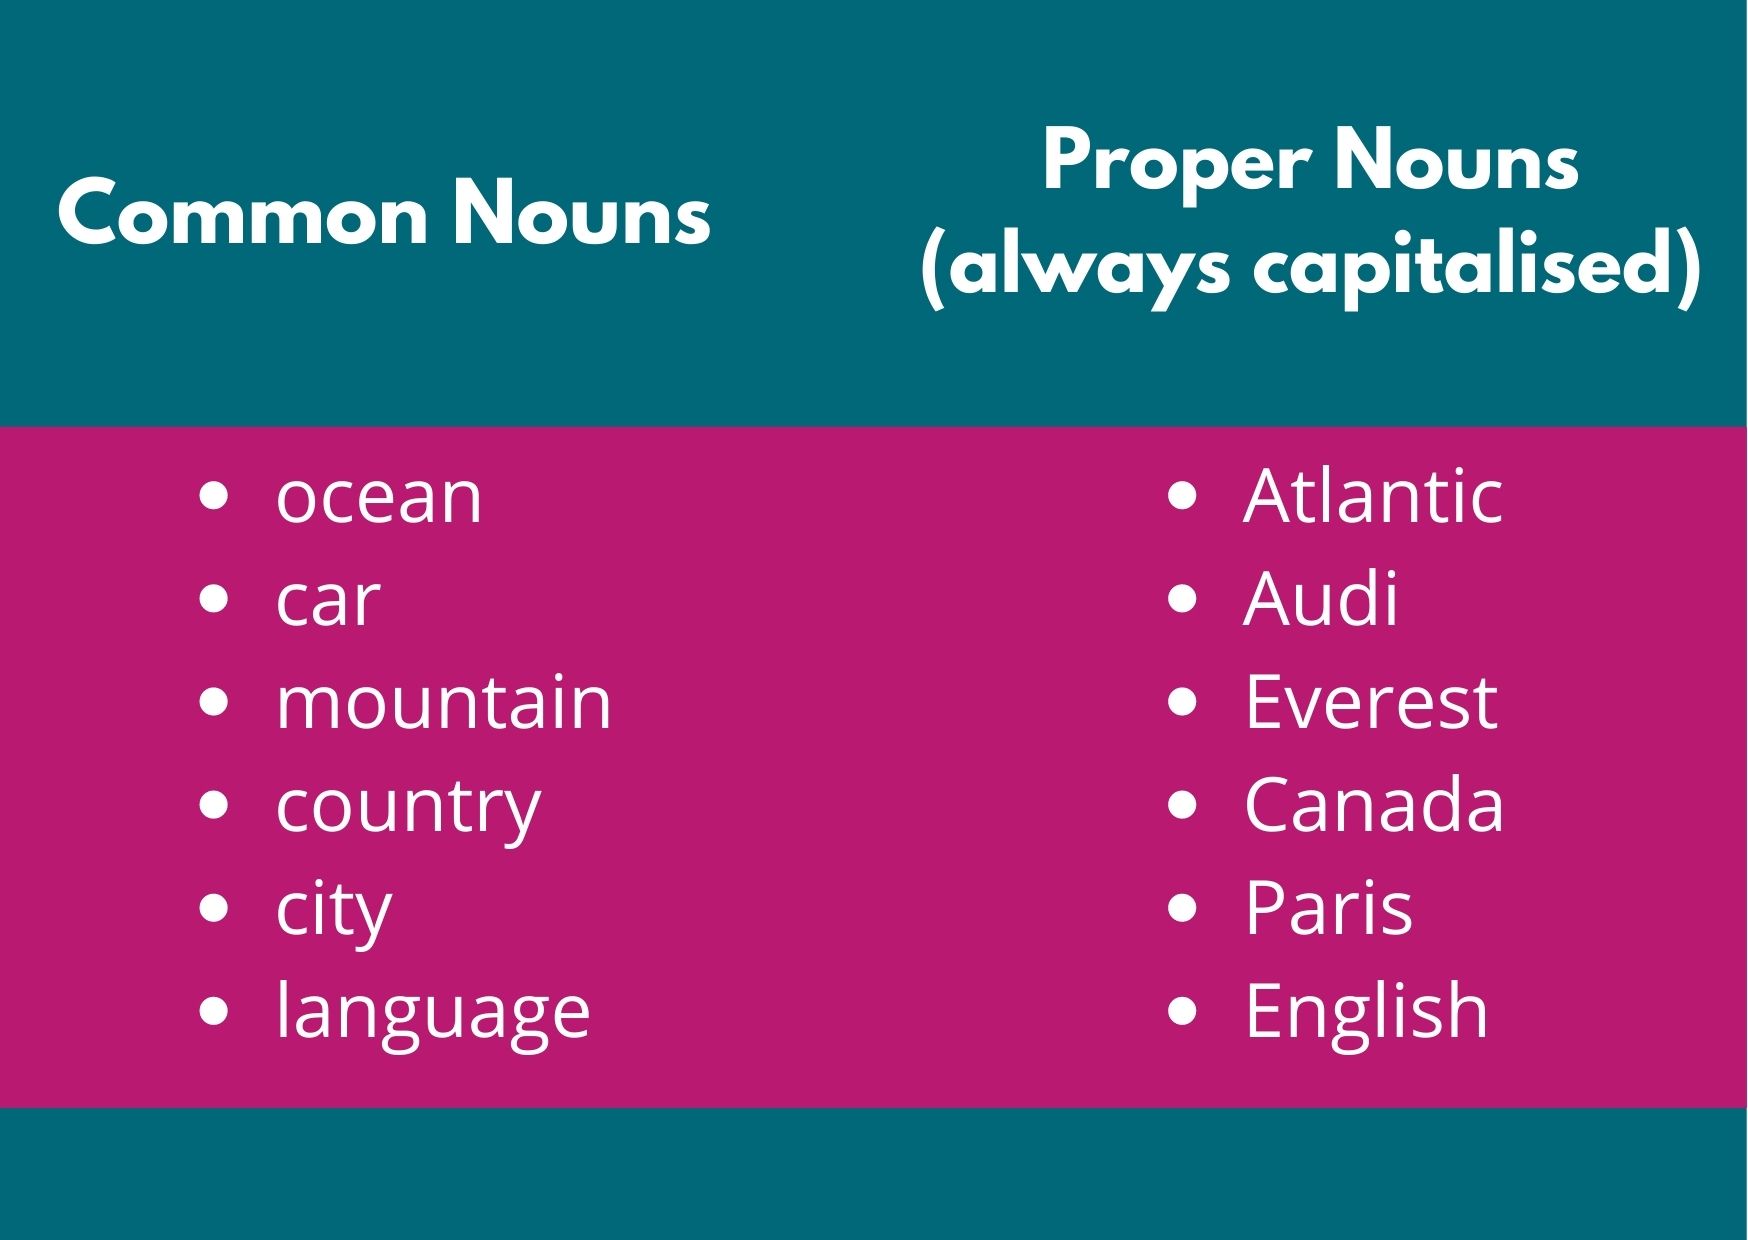 A graphic showing common nouns and their related proper nouns (ocean-atlantic, car-audio, mountain-severest, country-canada, city-parks, language-English)